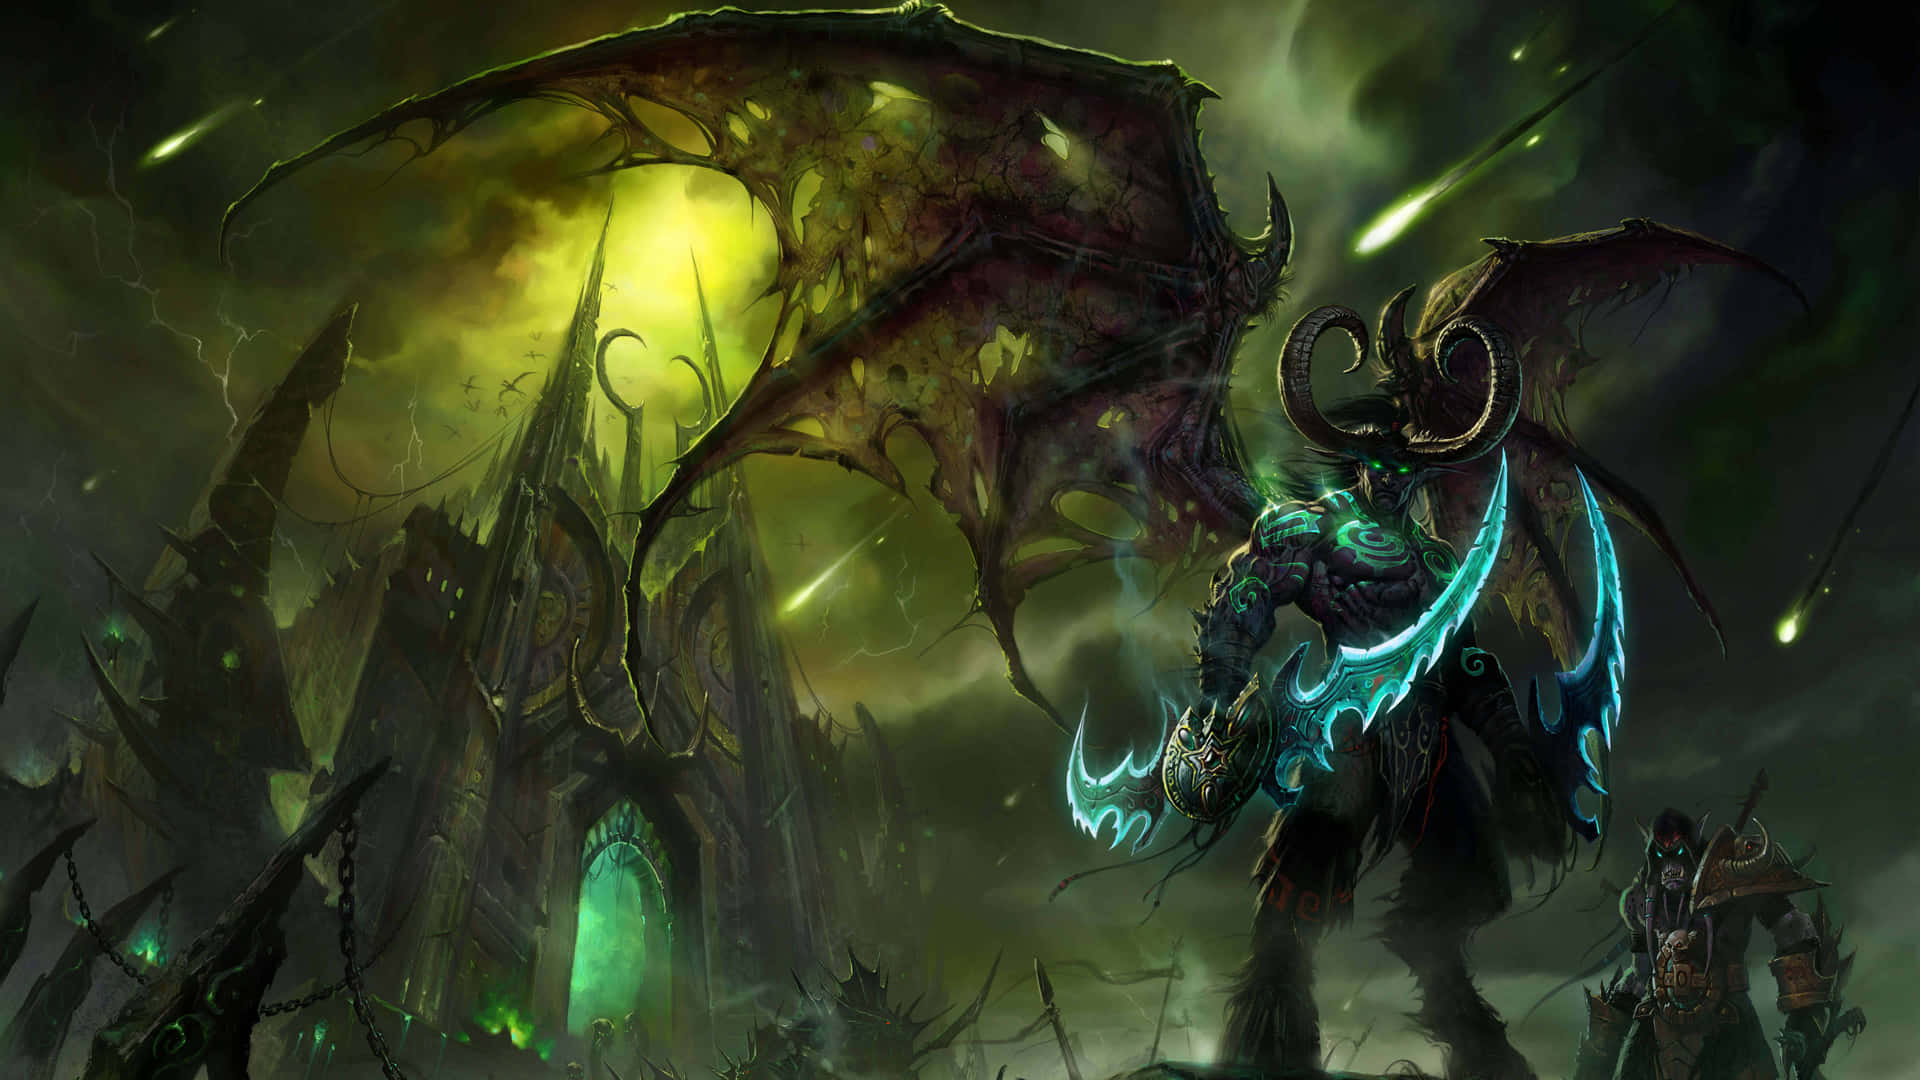 A World of Warcraft Races gathering in an epic battle scene Wallpaper